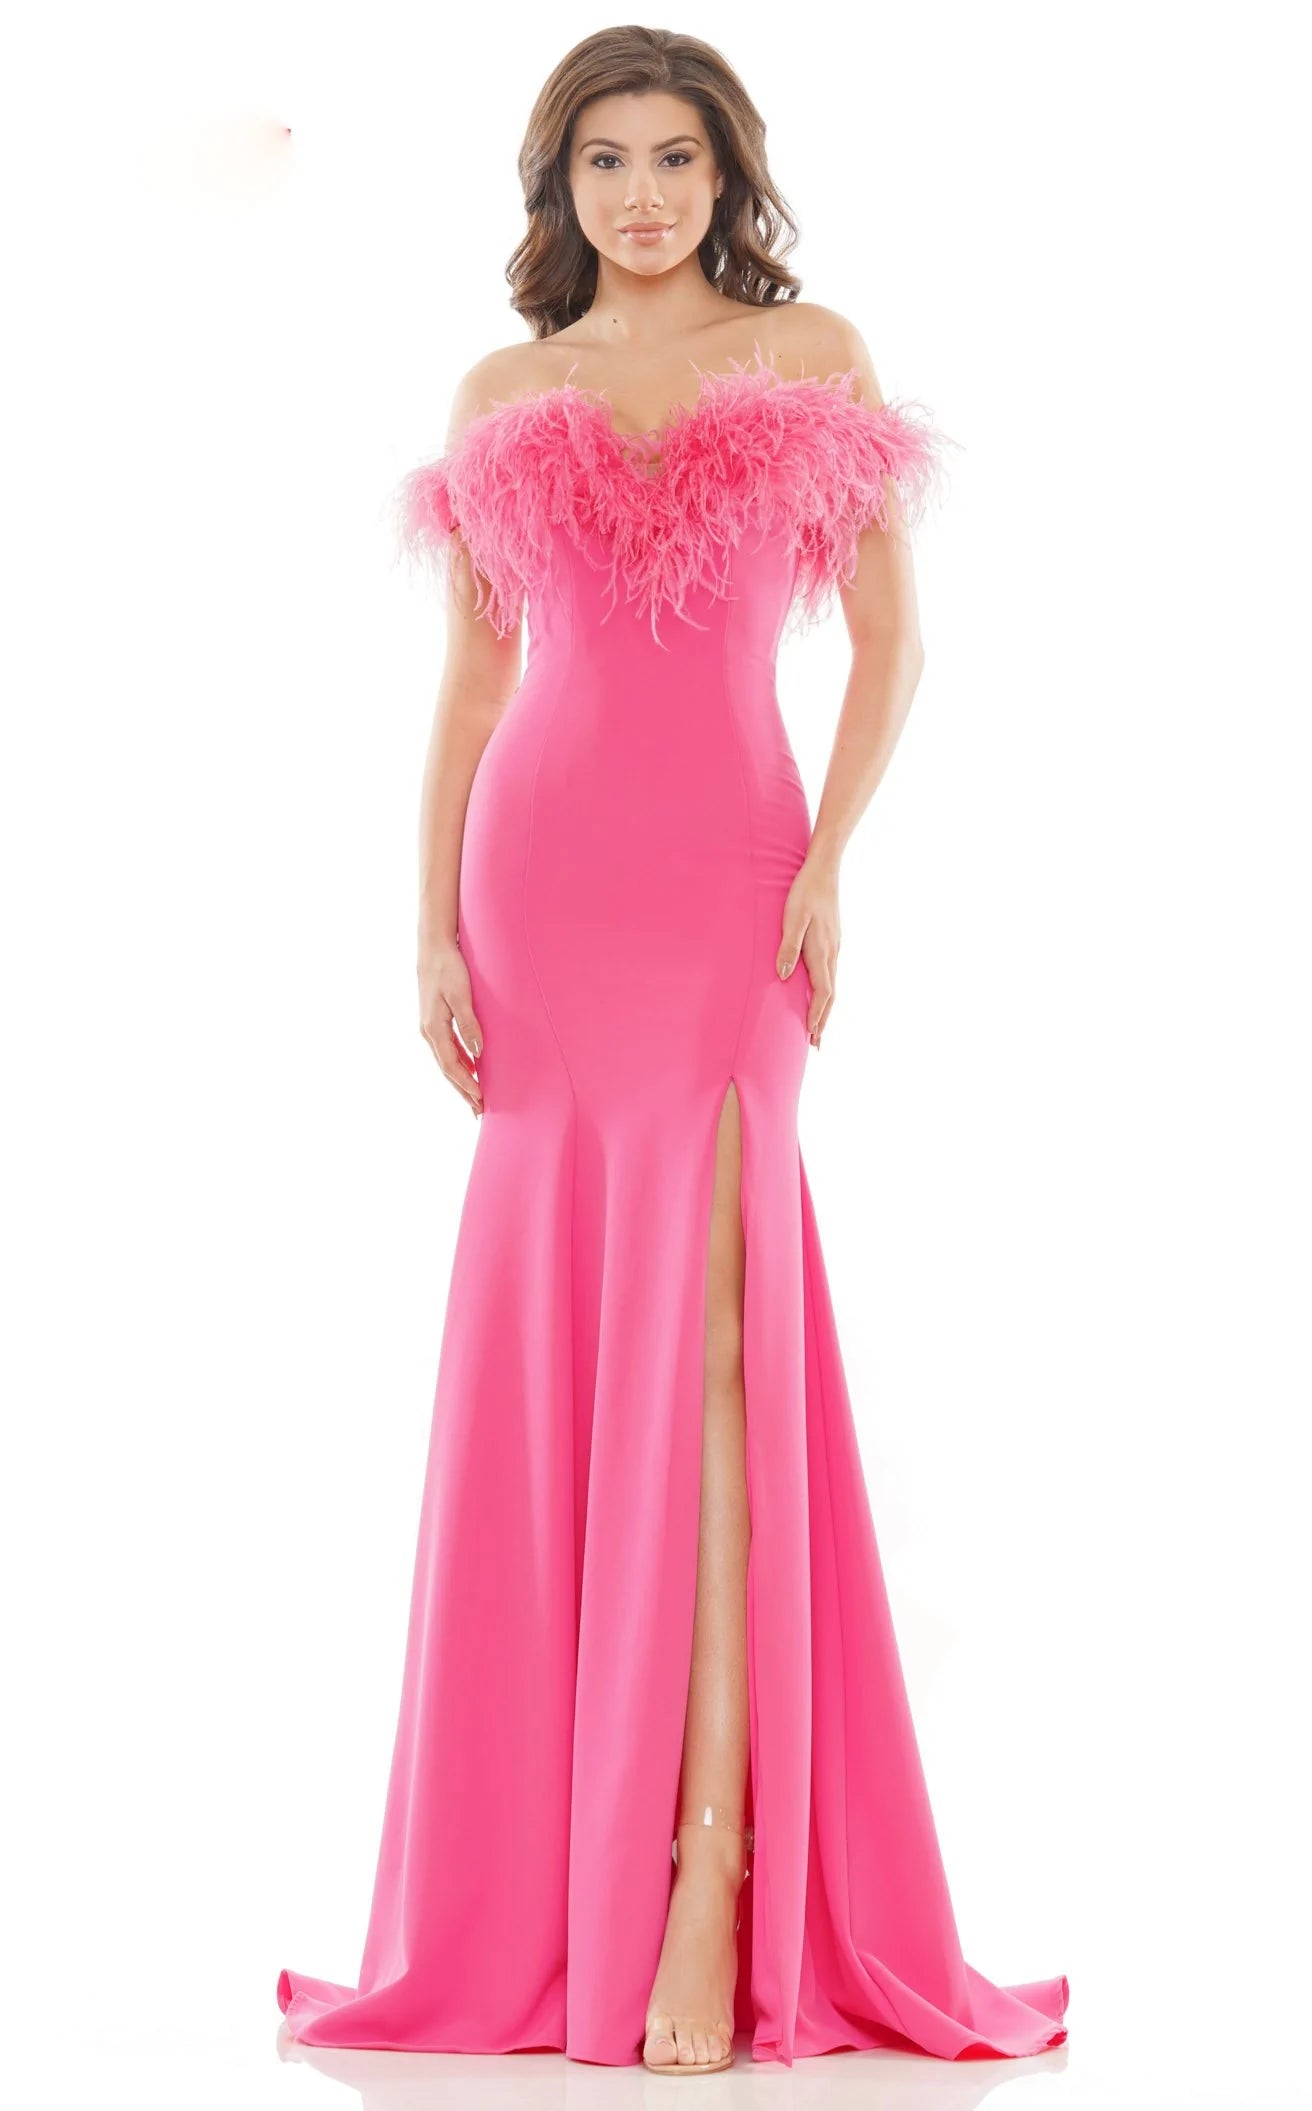 Ruffled Off-the-shoulder Puff Sleeve Baby Pink Prom Dress - Lunss